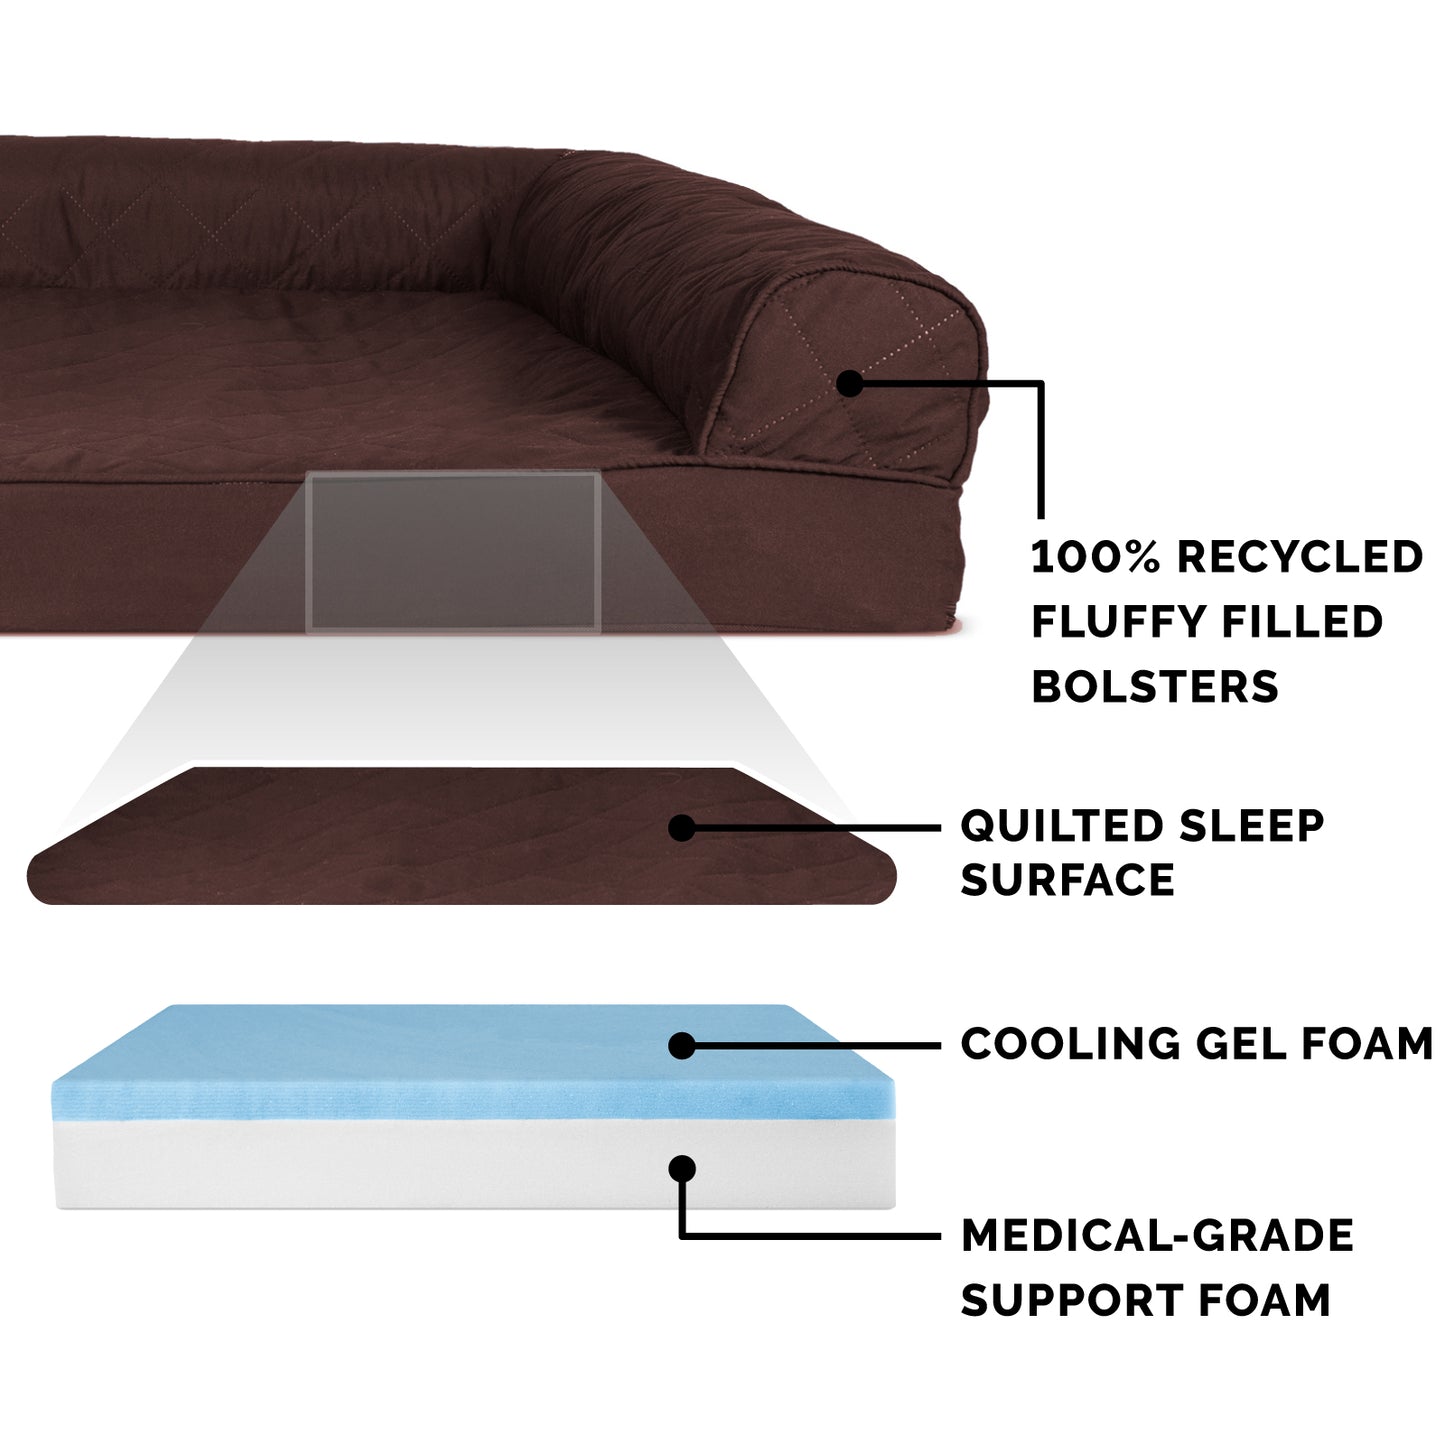 Quilted Memory Foam Sofa-Style Couch Pet Bed